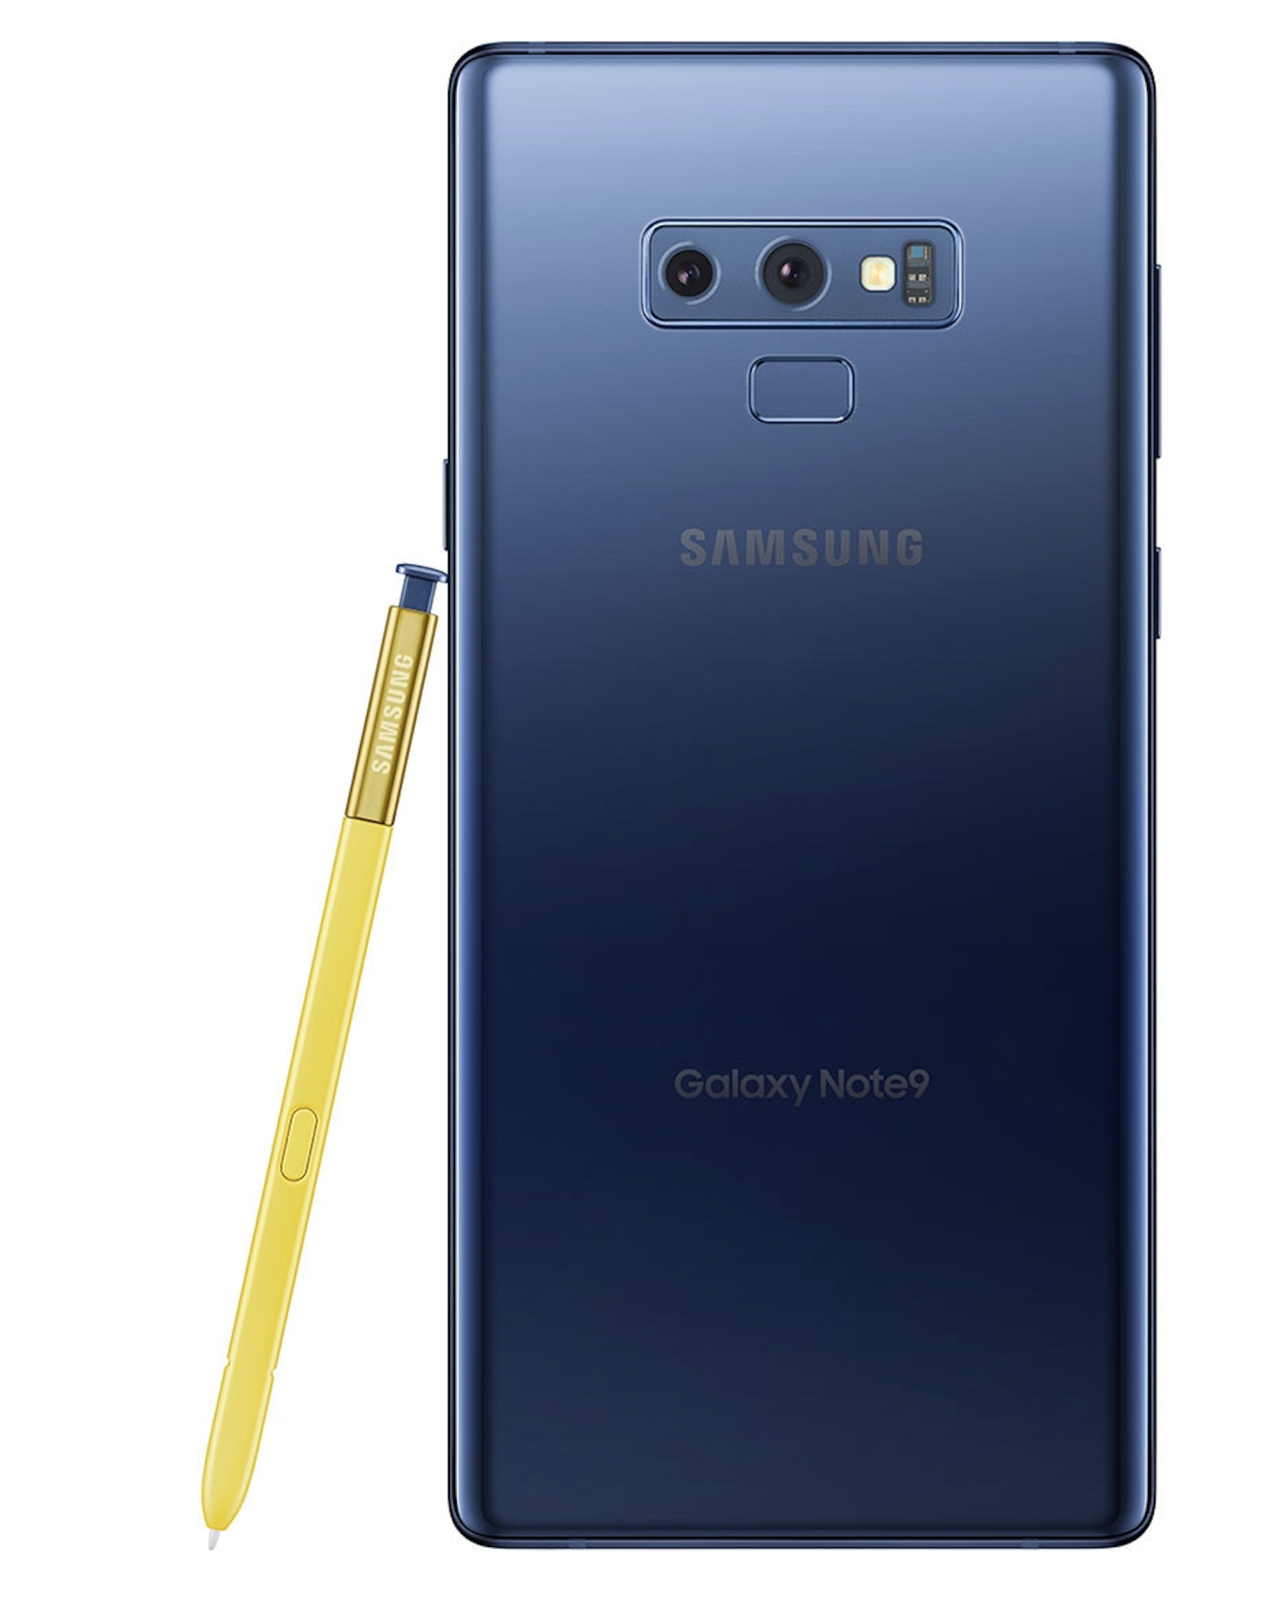 Samsung Galaxy Note 9 set for January 15 update to Android 9 Pie